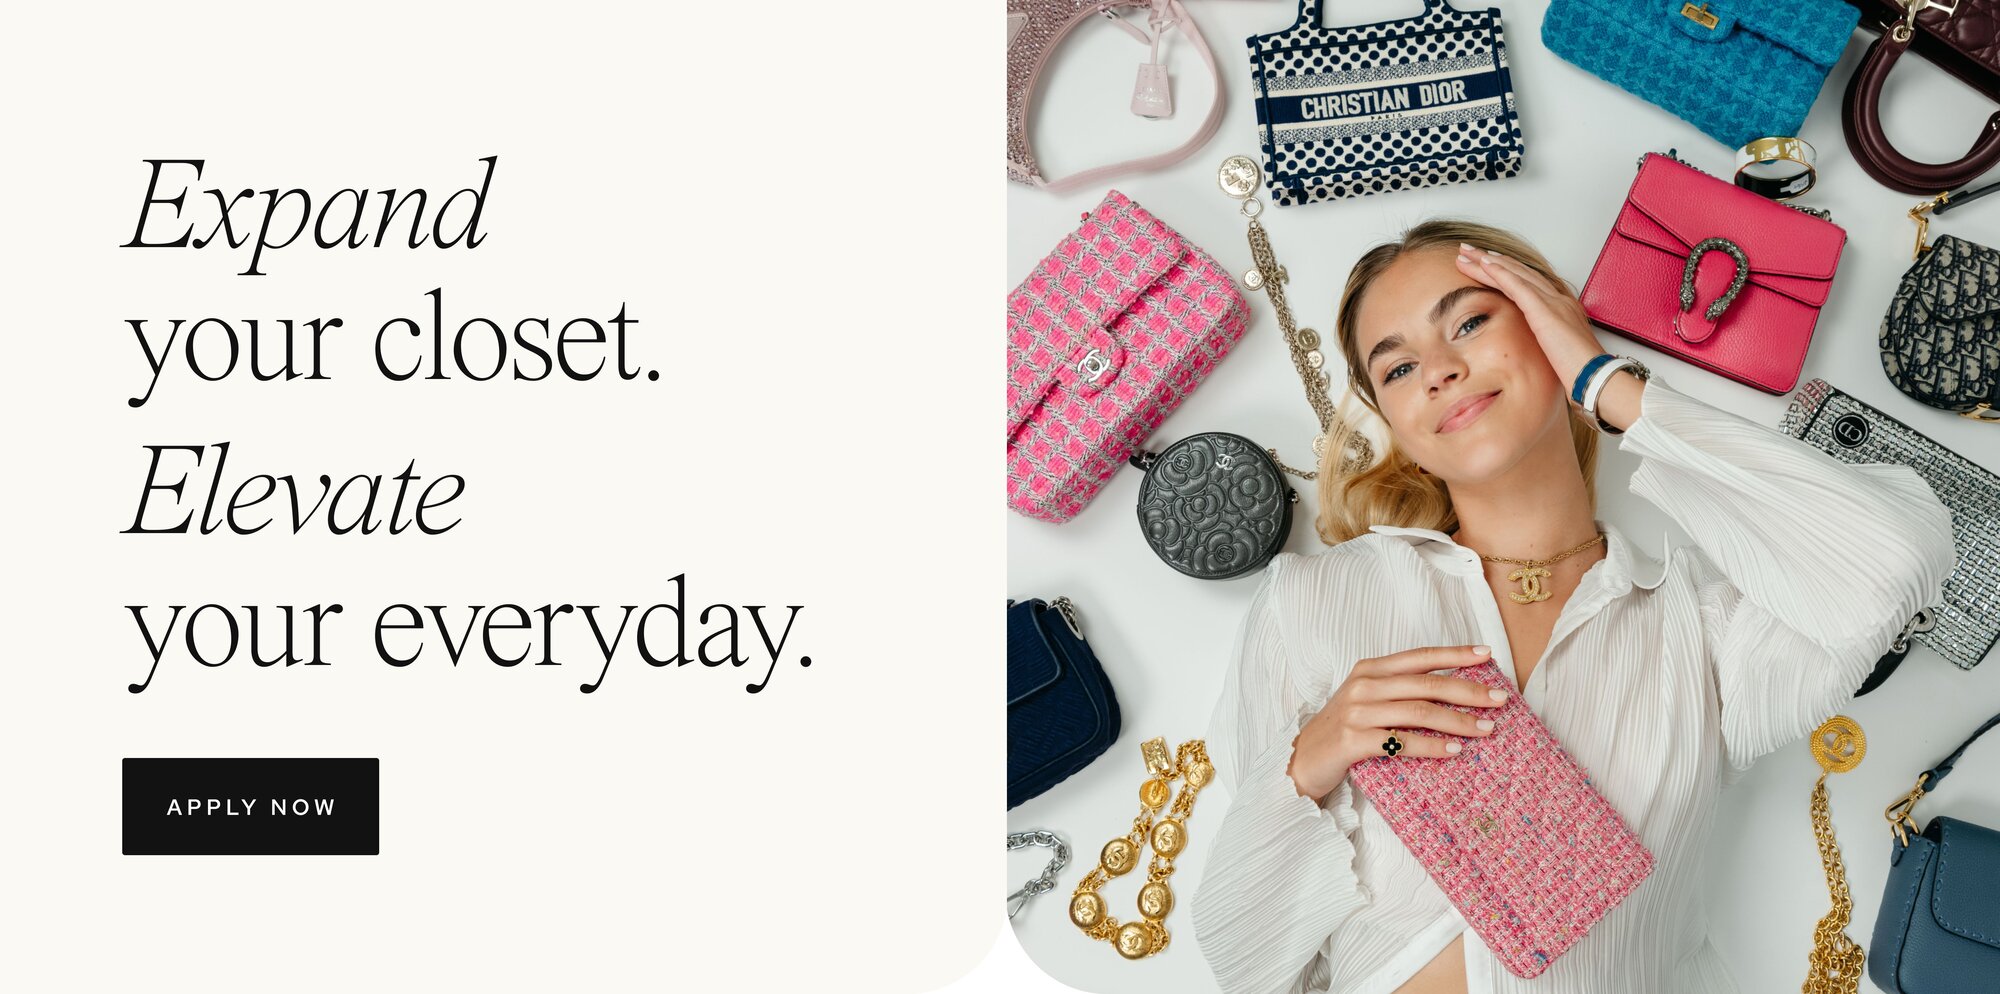 Photo of a woman laying down, smiling, clutching a pink luxury bag amidst a collection of chic luxury handbags and accessories from Vivrelle. Text to the left reads: "Expand your closet. Elevate your everyday." Button prompt: "Apply Now."